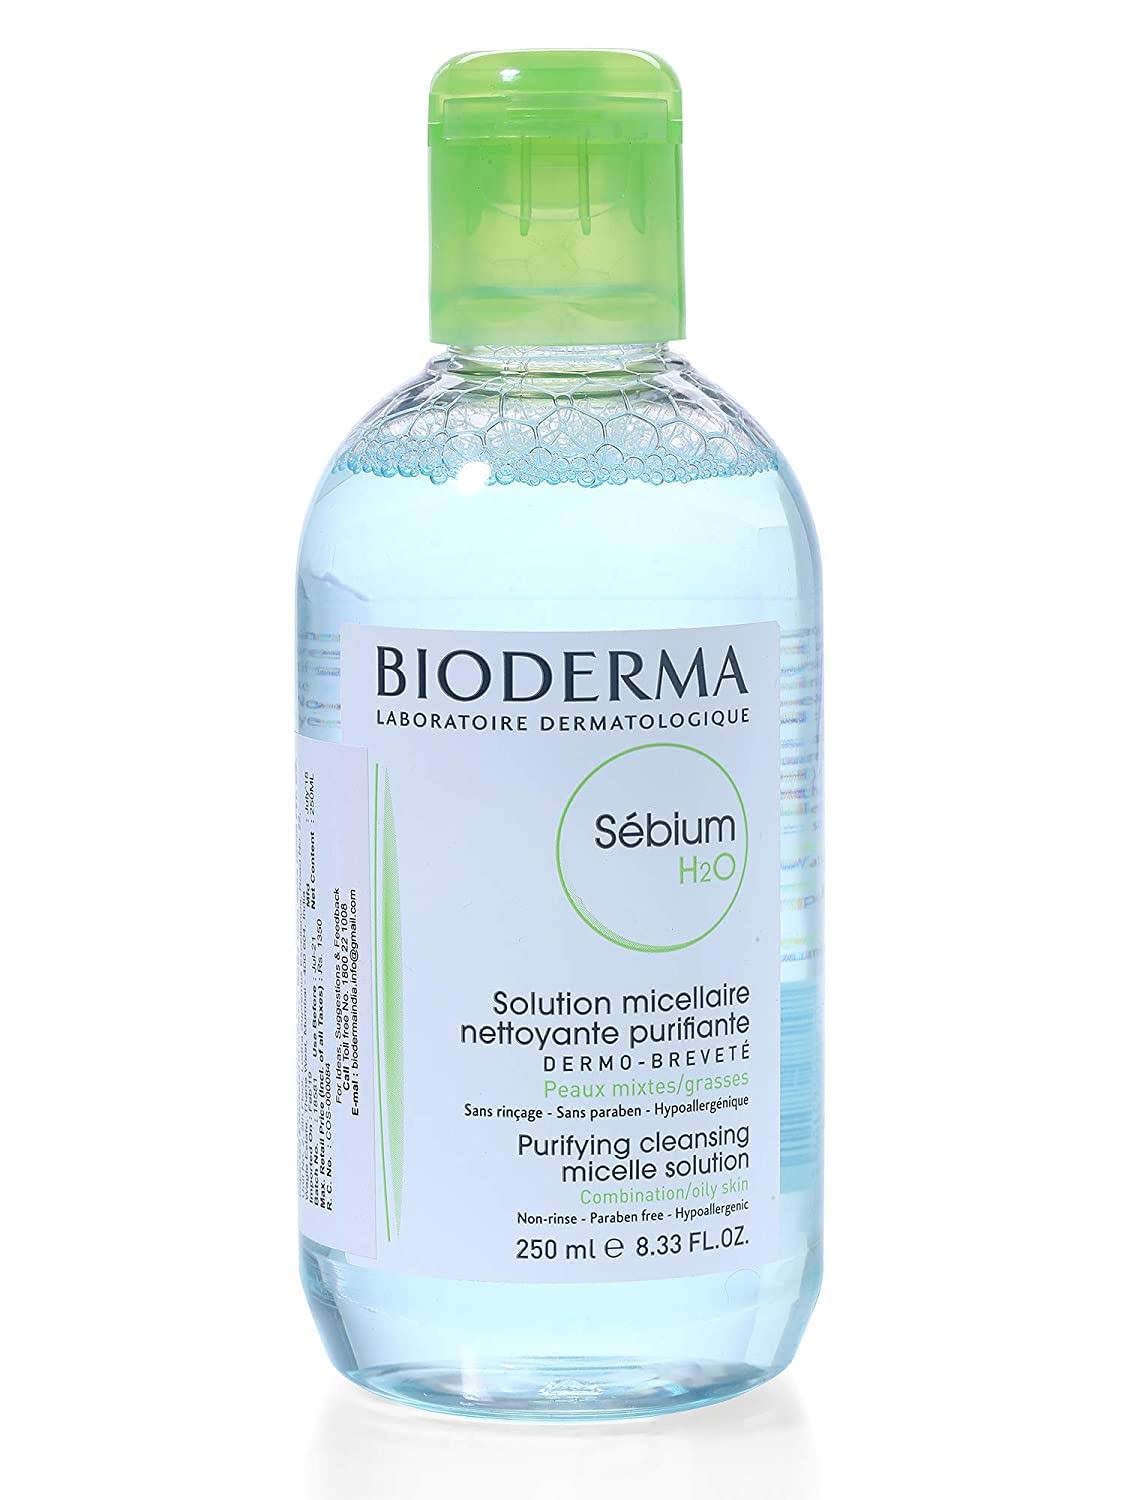 Bioderma Sebium H2O Cleansing Solution for Oily and Combination Skin